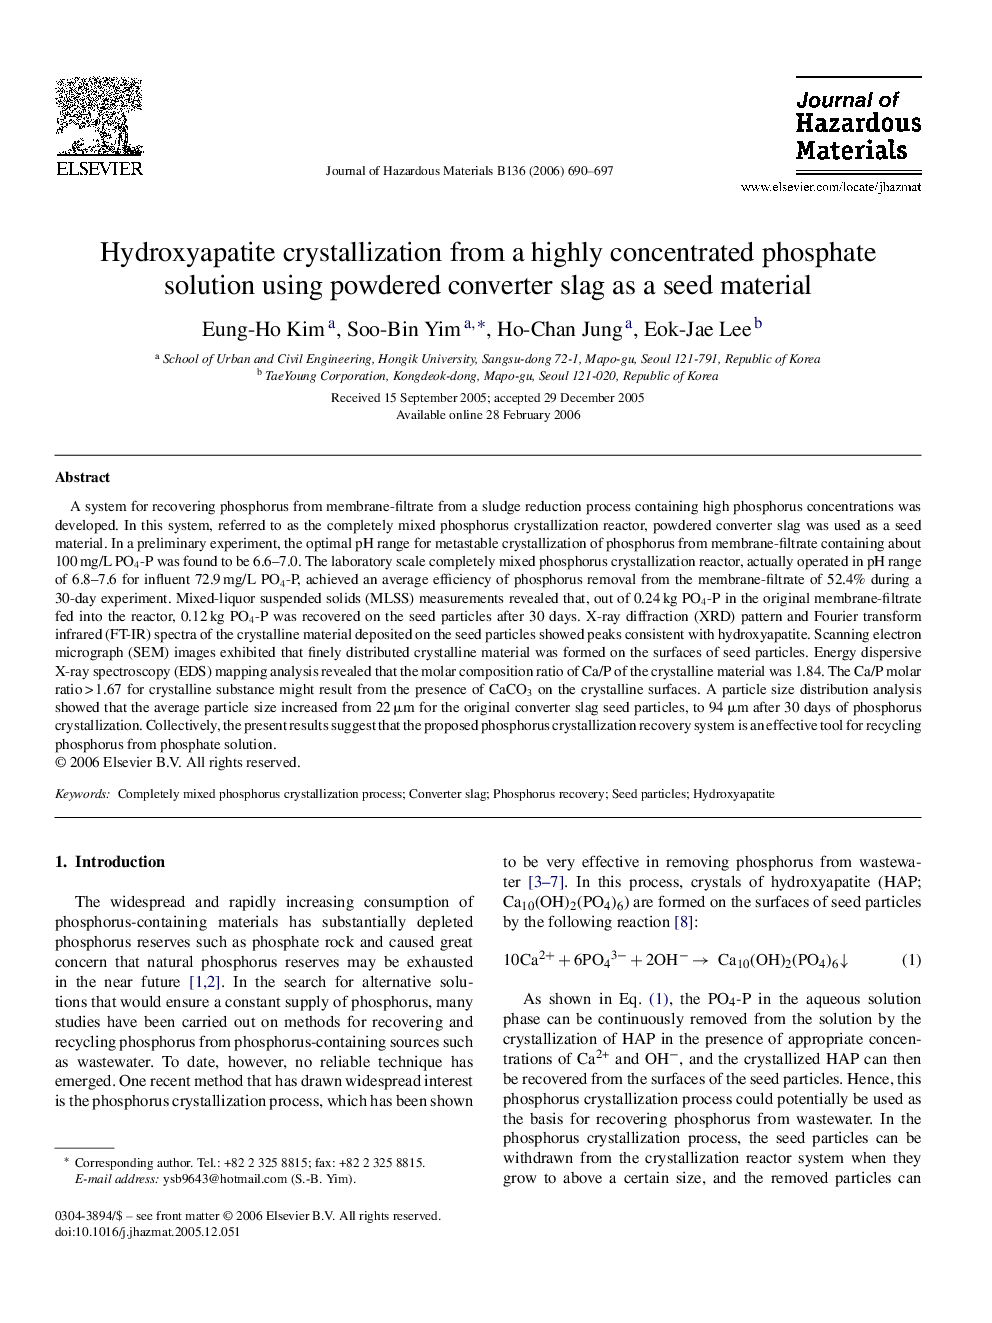 Hydroxyapatite crystallization from a highly concentrated phosphate solution using powdered converter slag as a seed material